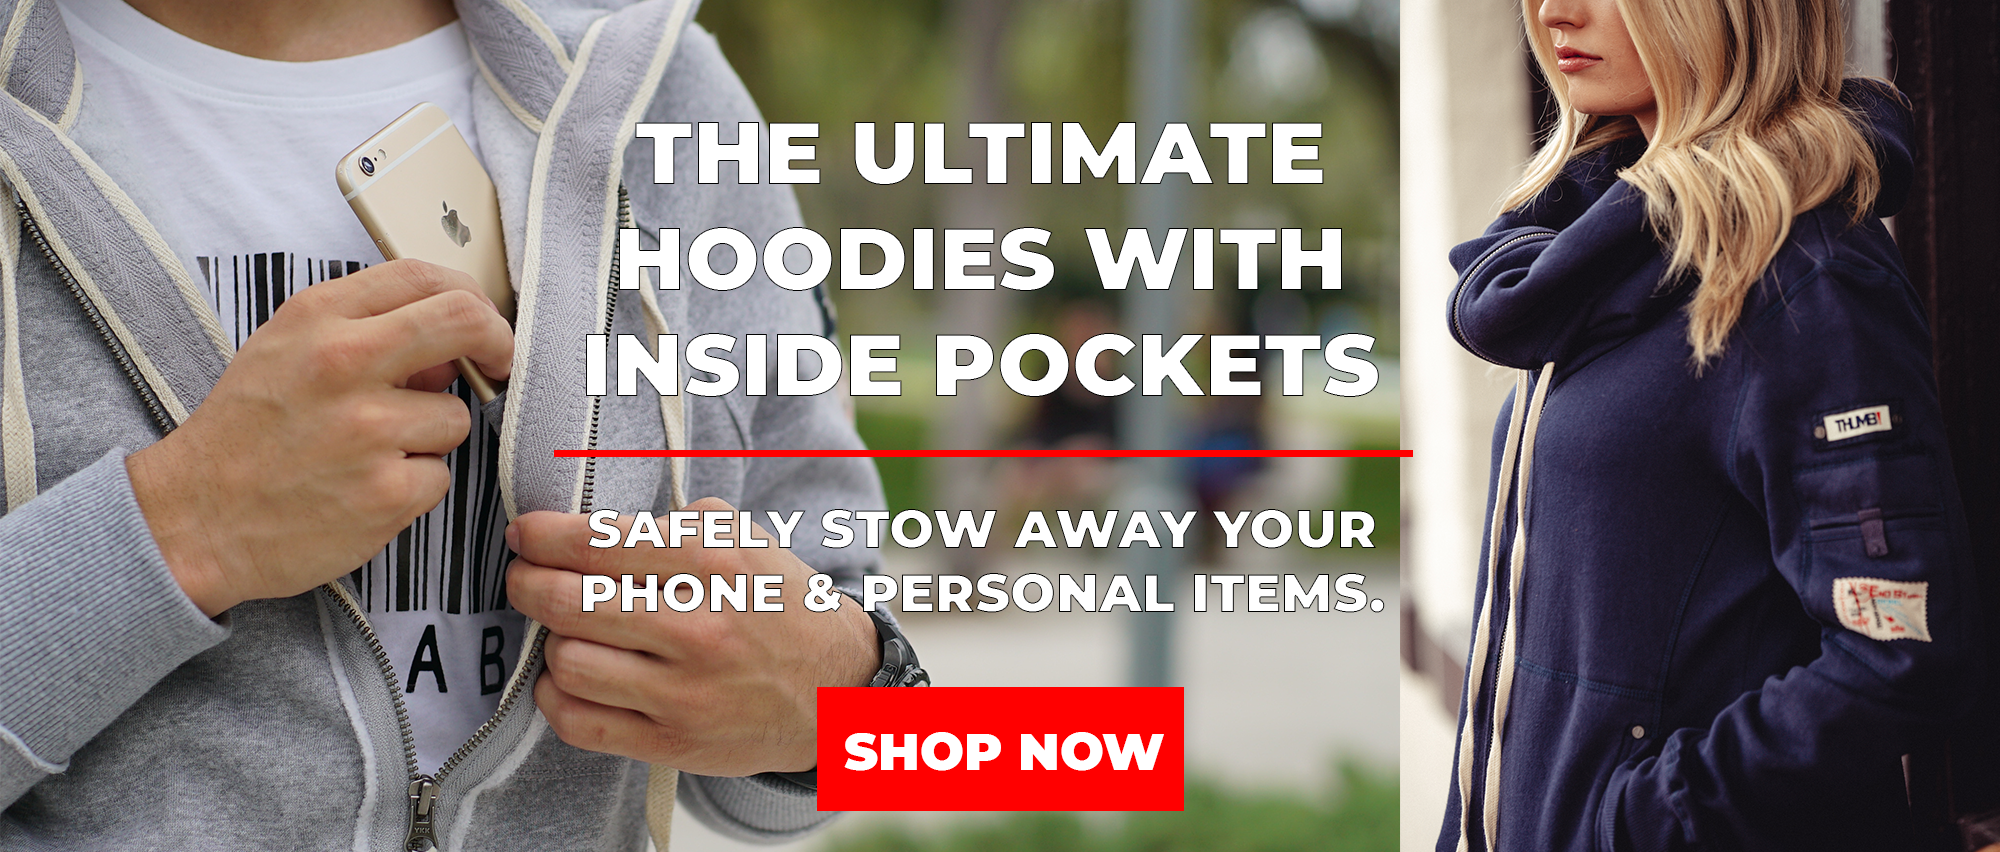 Ultimate Hoodies with Inside Pockets